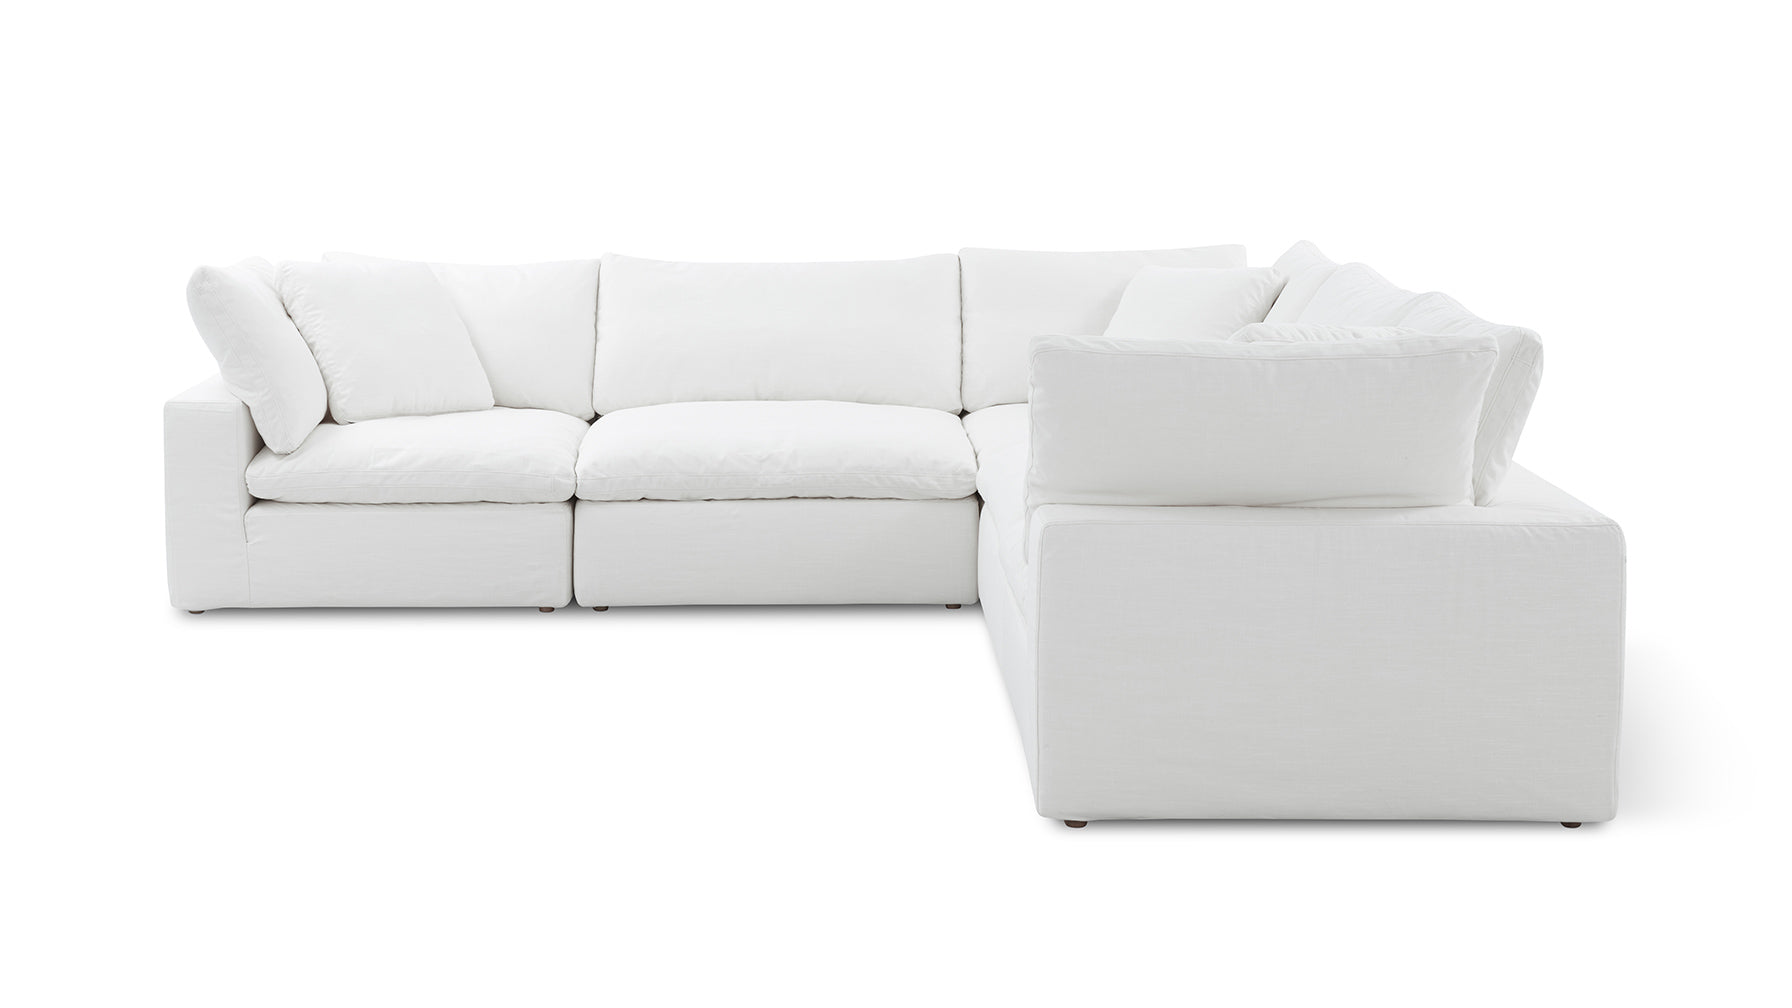 Movie Night™ 5-Piece Modular Sectional Closed, Large, Brie - Image 1